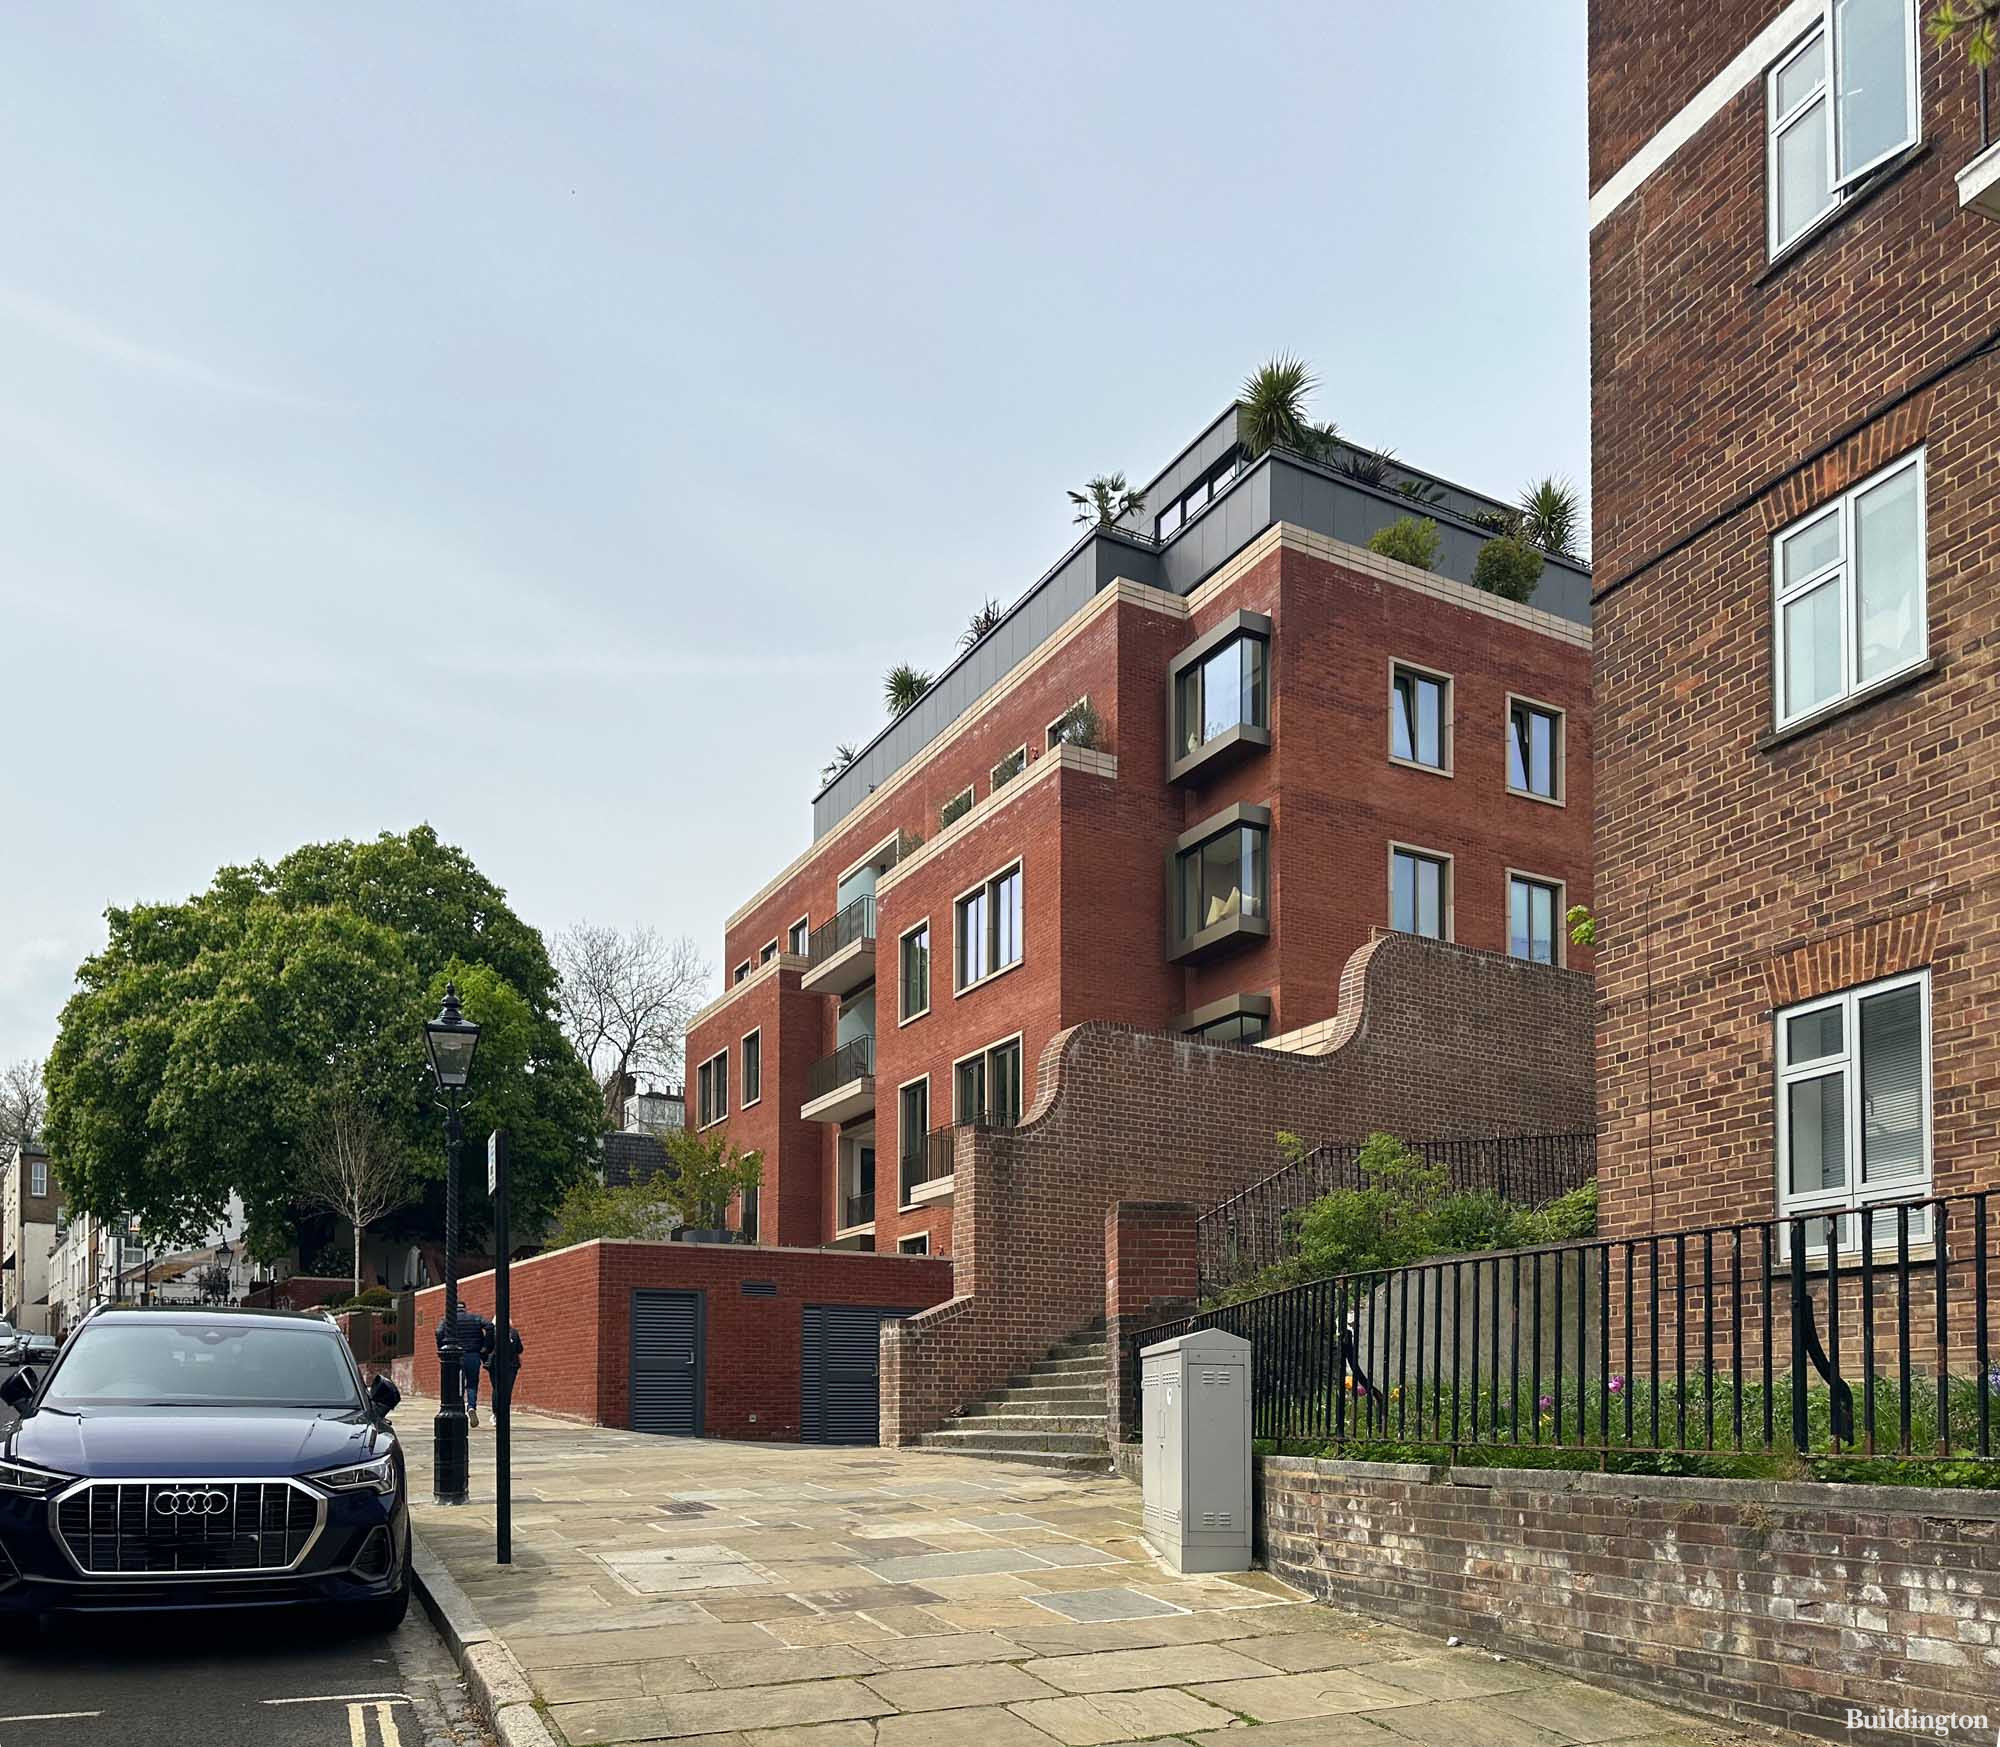 Novel House at 29 New End developed by Linton, completed in 2020 in Hampstead, London NW3.